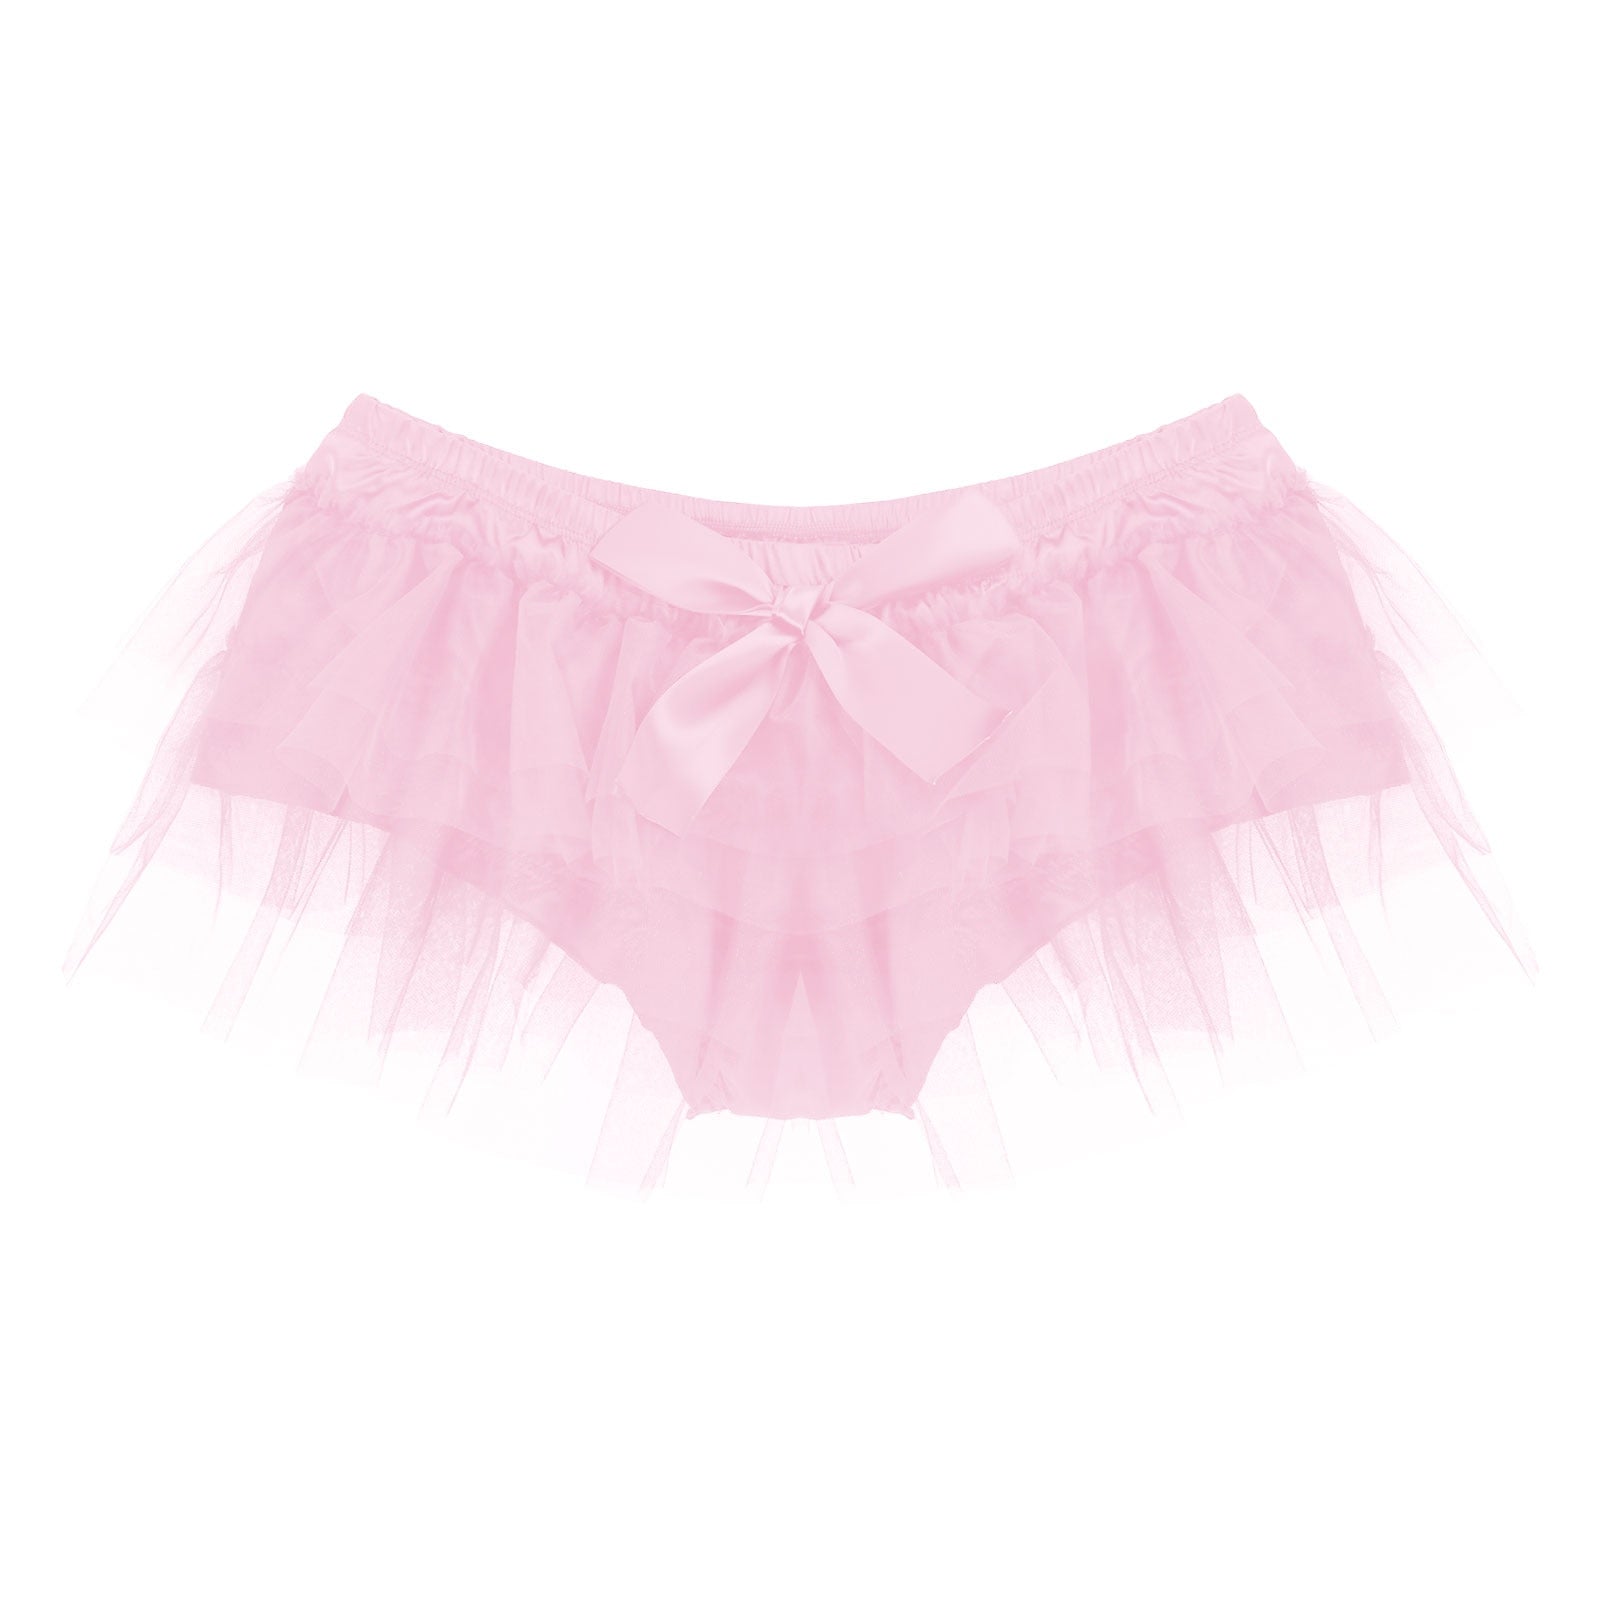 Mens Sissy Lingerie Exotic Panties Satin Frilly Layered Ruffle Tulle Mini Skirt Pink